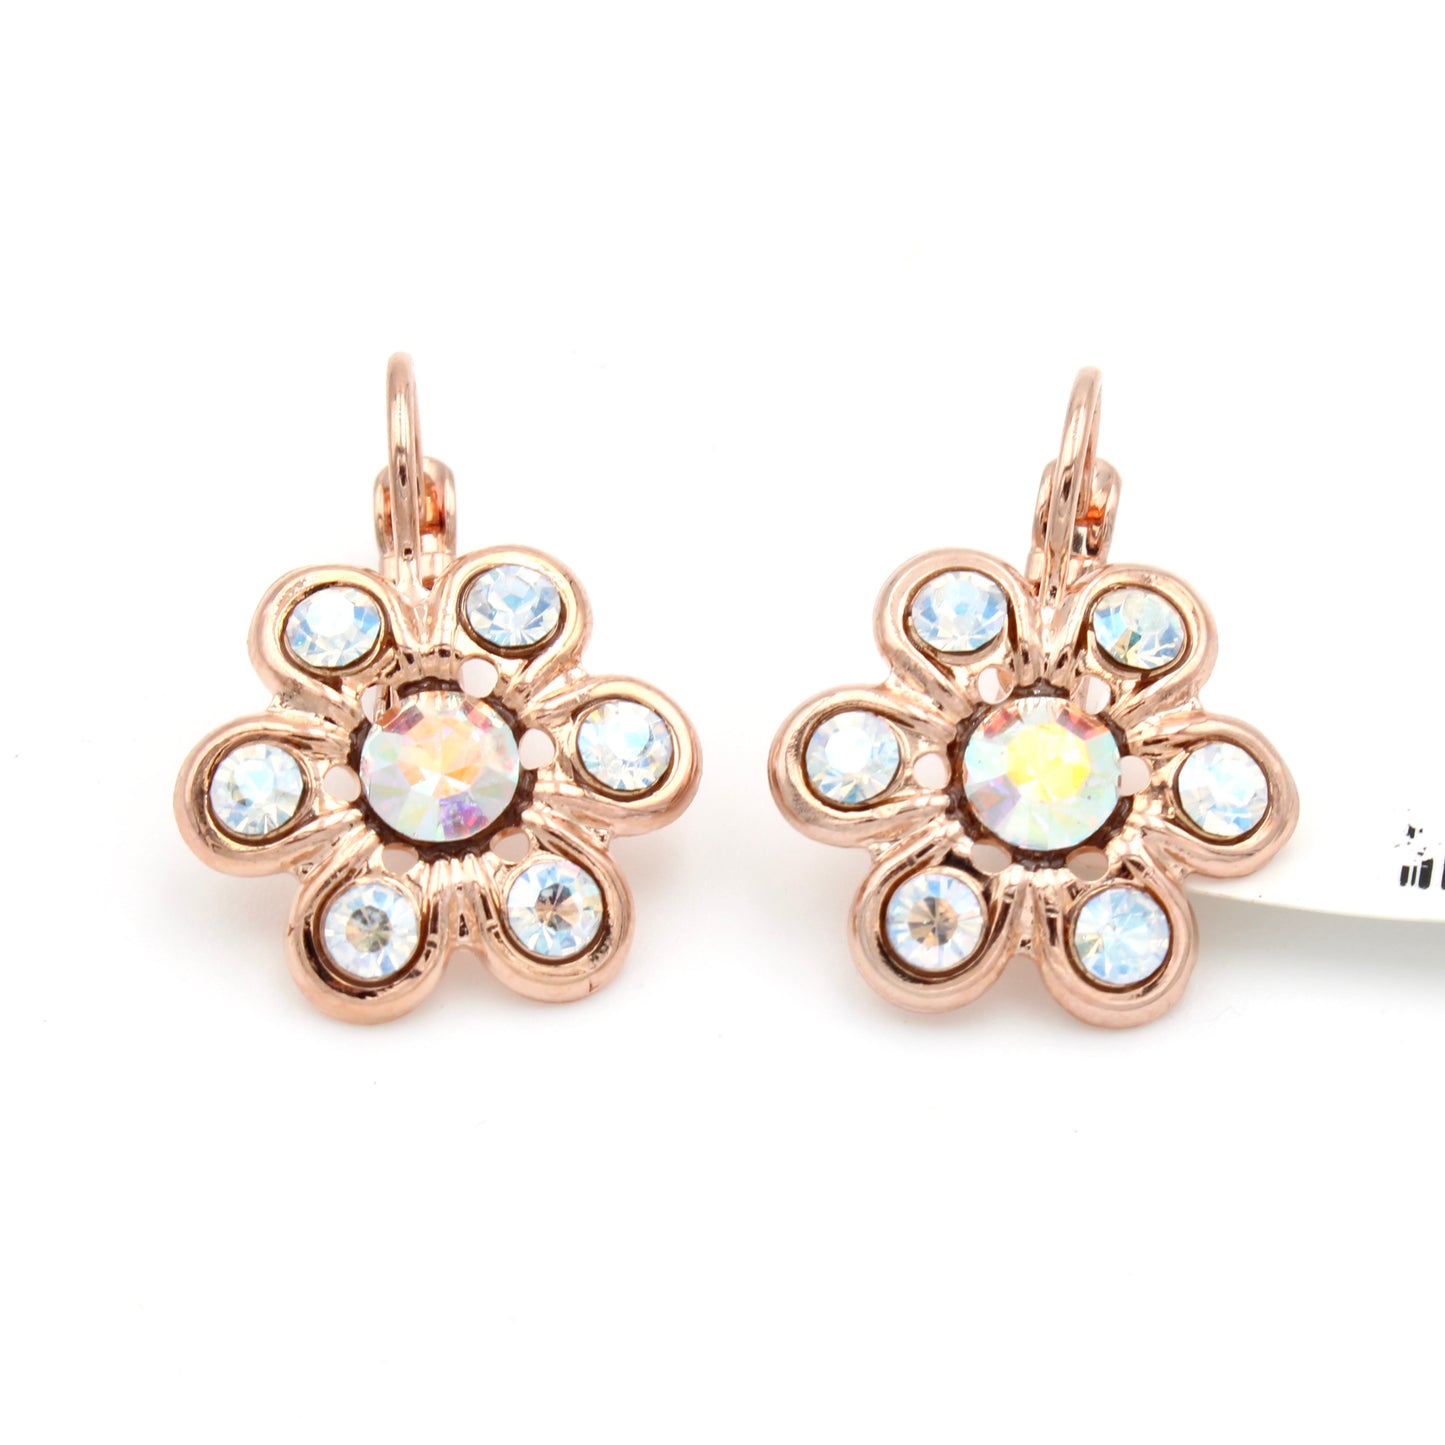 Winds of Change Extra Luxurious Buttercup Earrings in Rose Gold - MaryTyke's